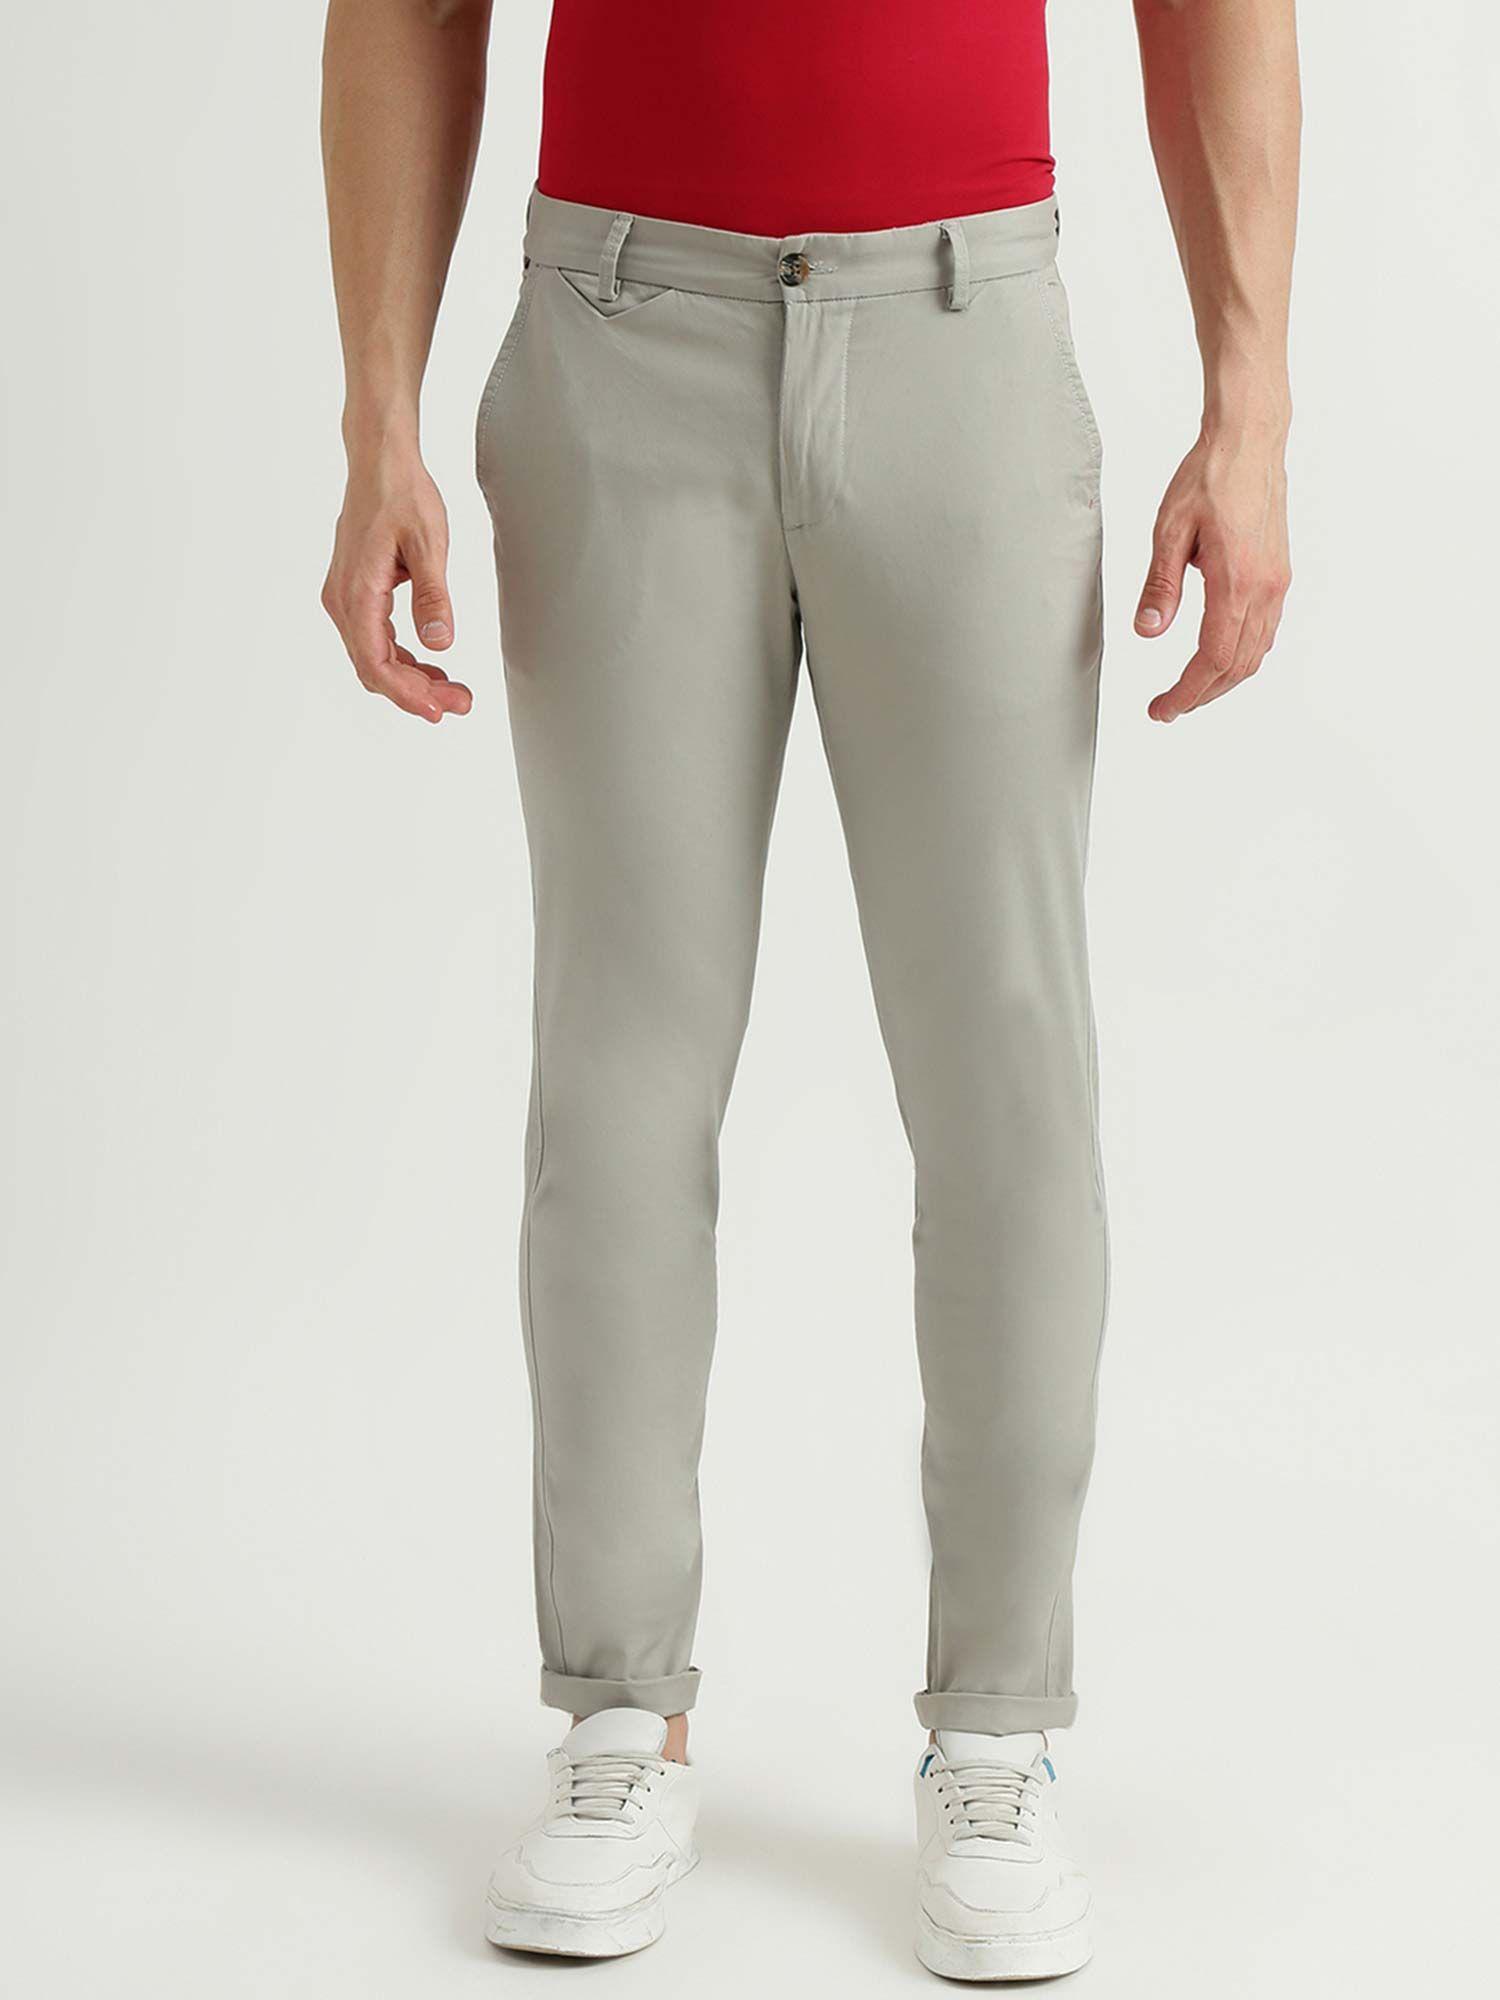 mens-slim-fit-solid-trousers